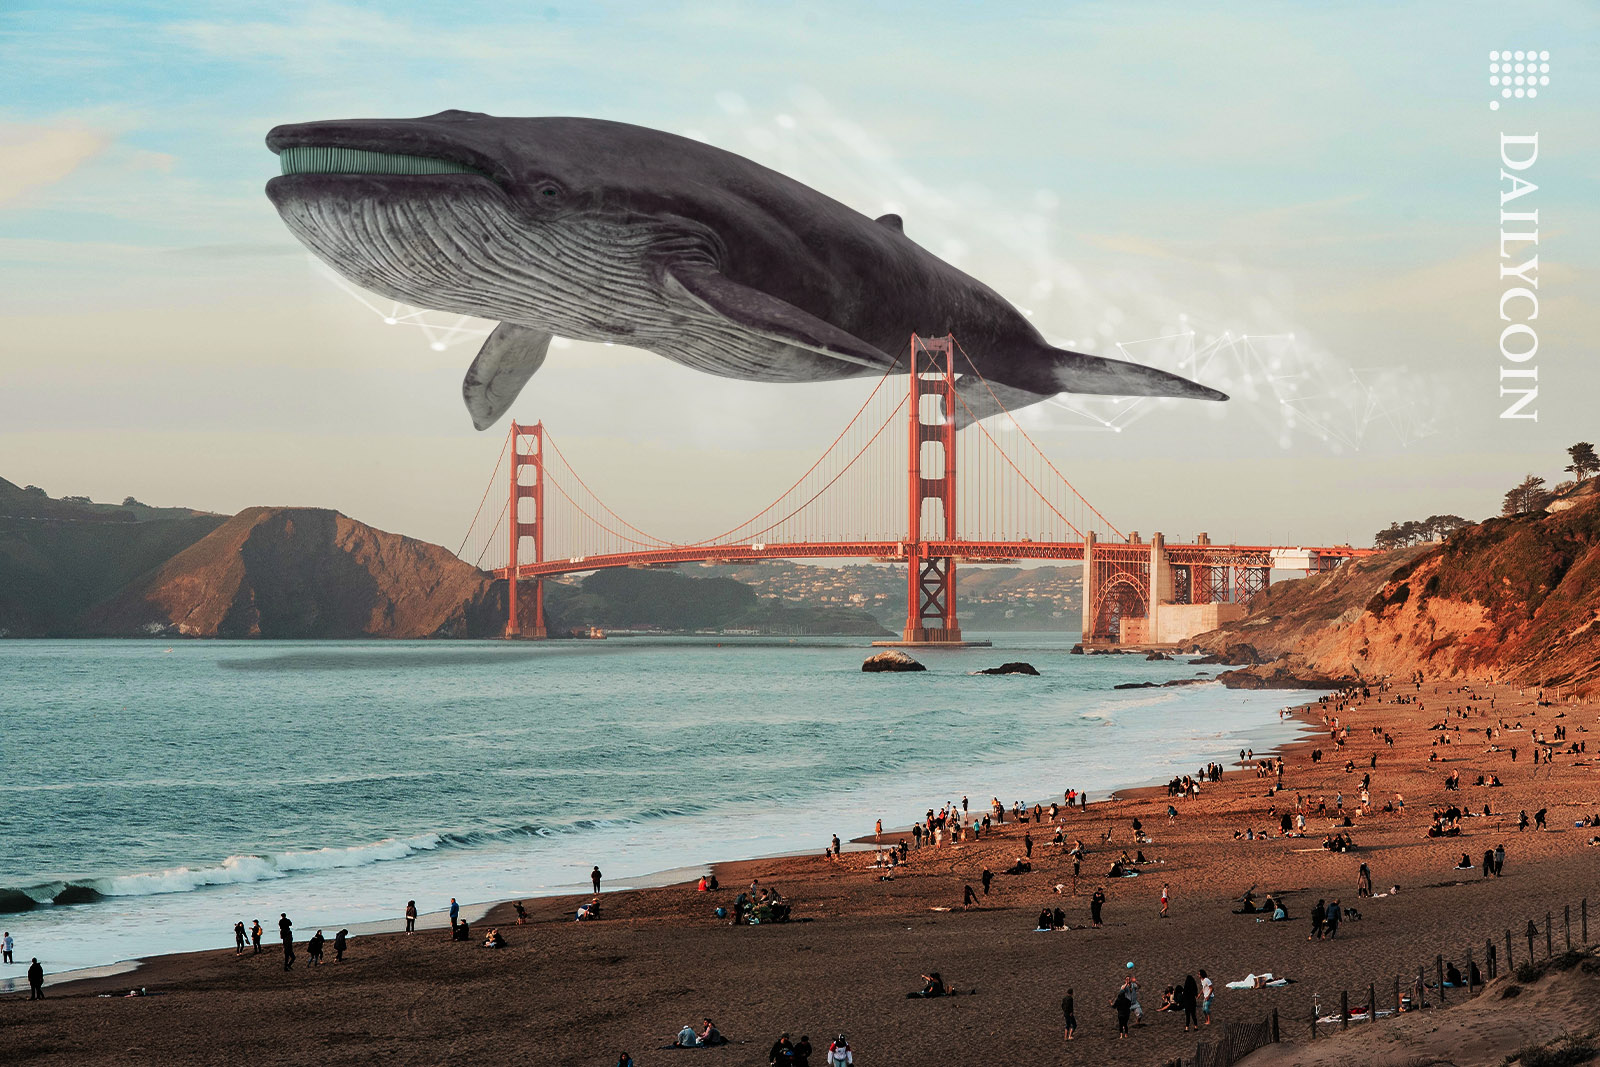 A giant whale flying above the Golden Gate bridge.